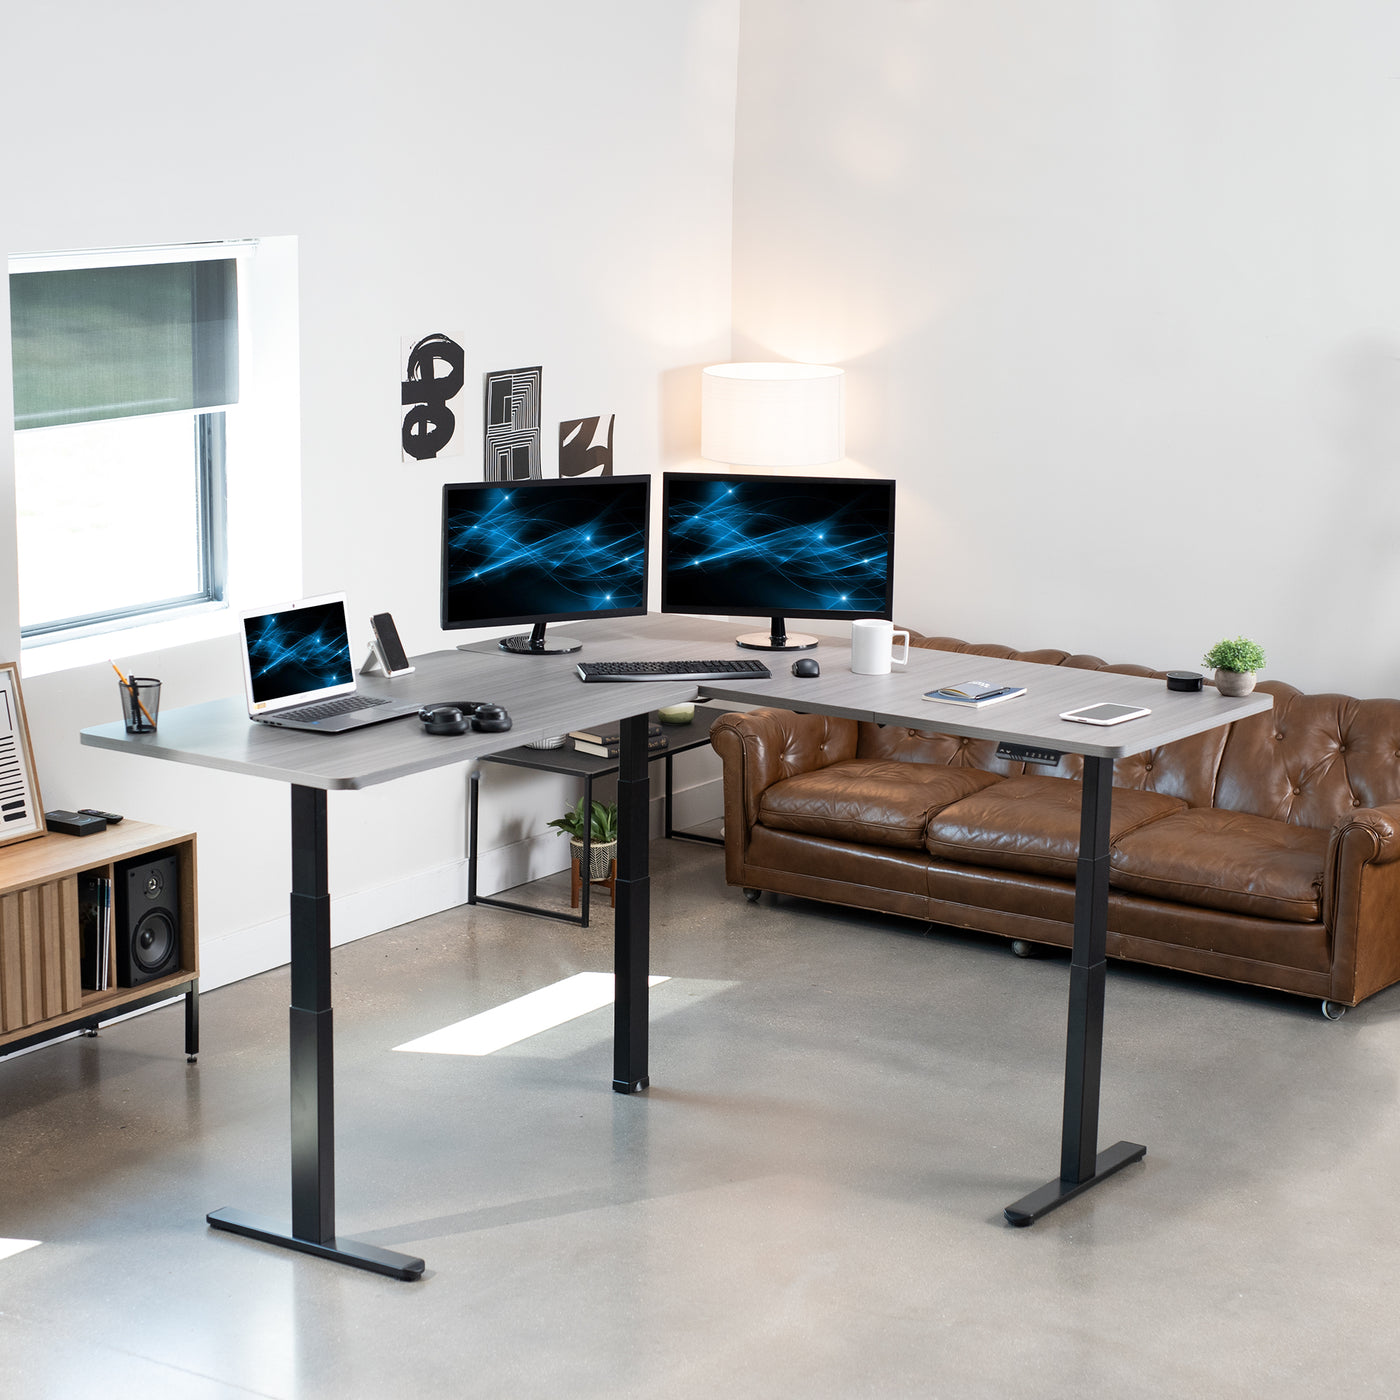 Enjoy a spacious workstation that accommodates an active work life with the Corner 77" x 71" Electric Desk